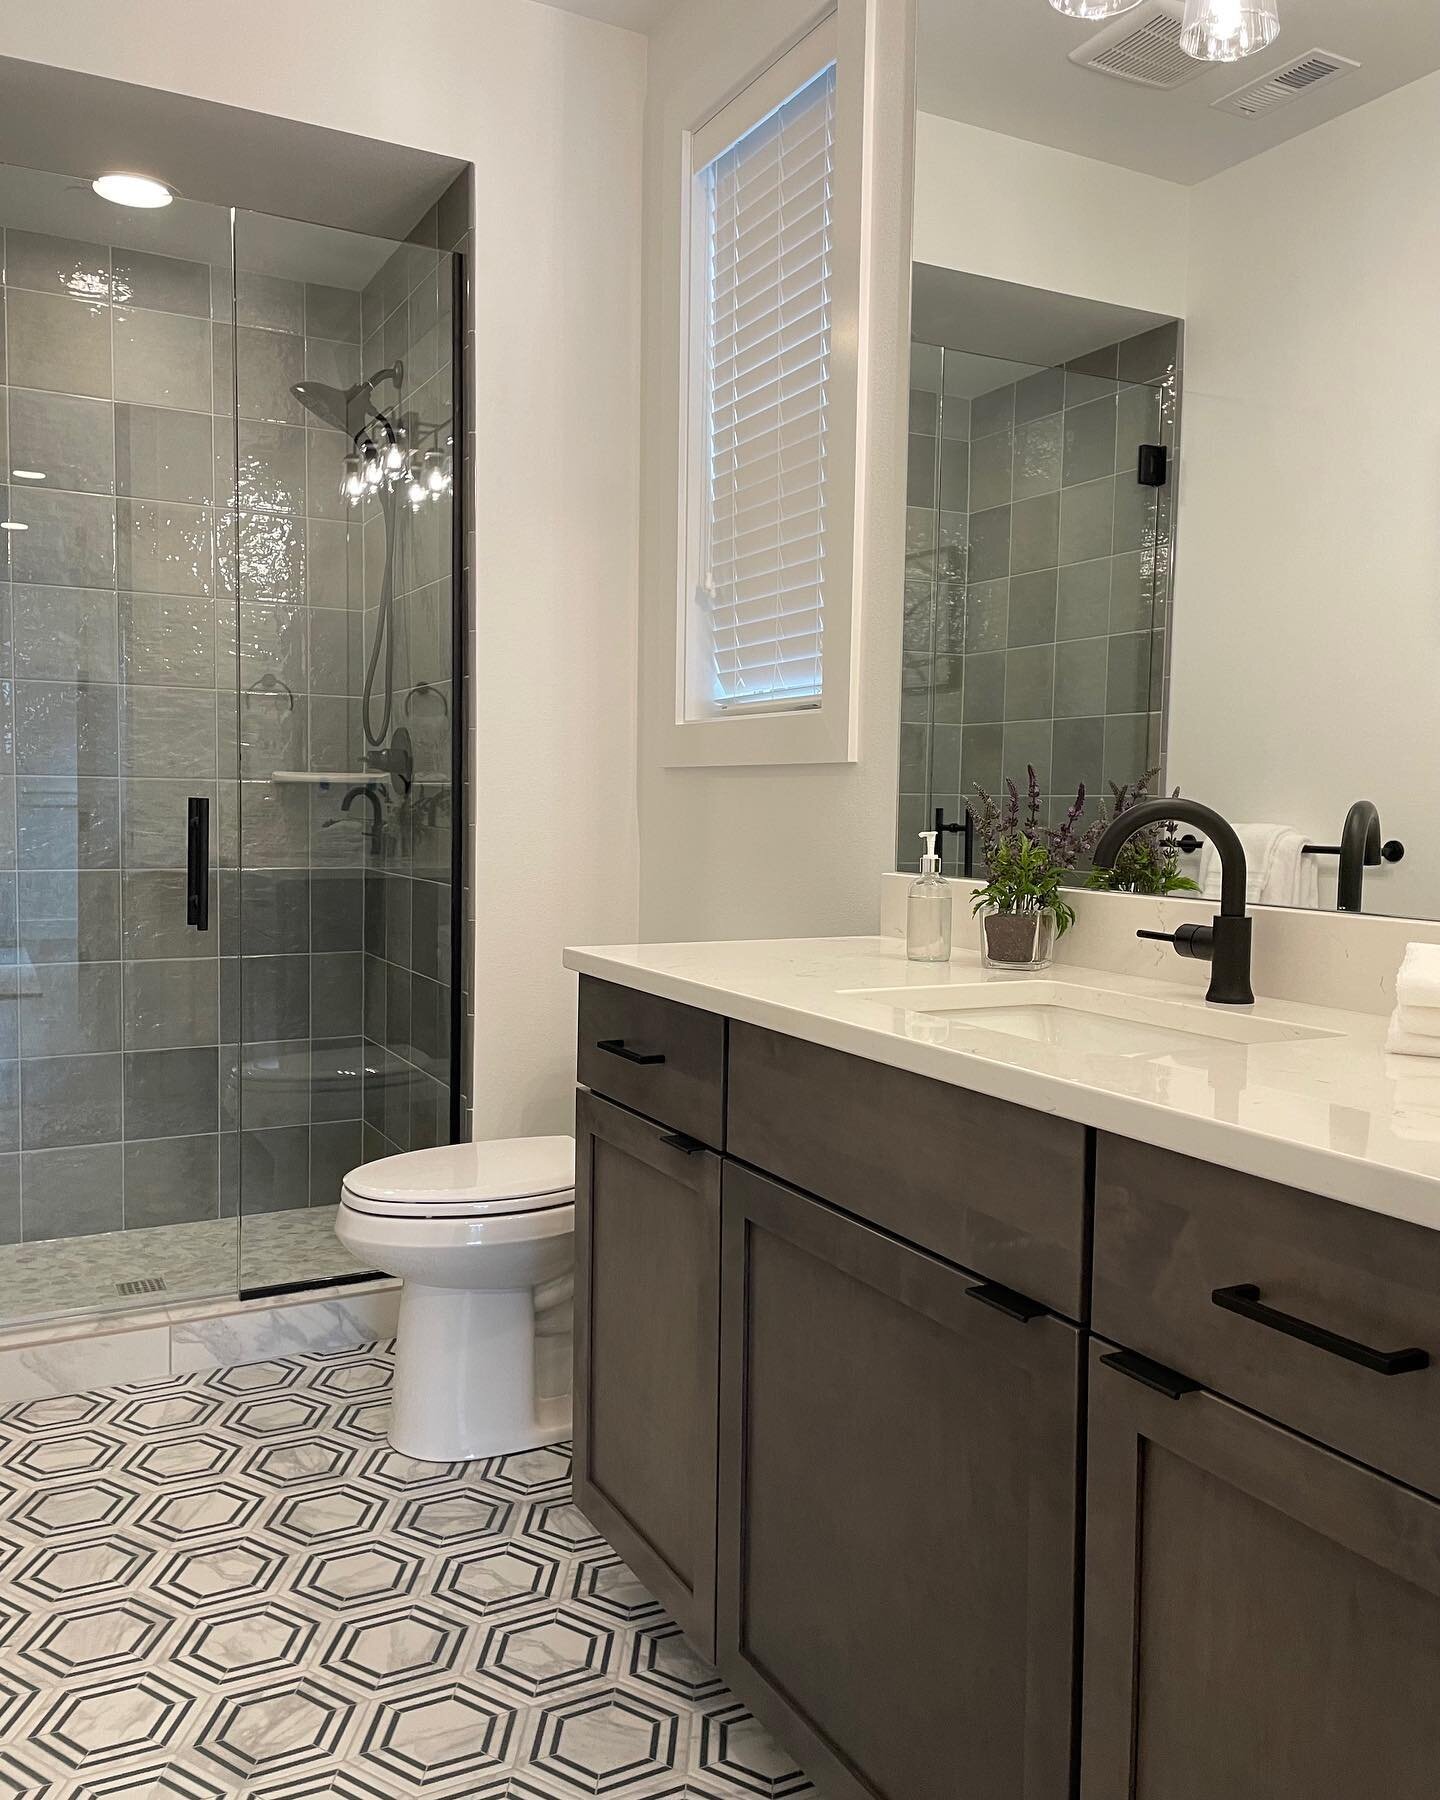 We can&rsquo;t decide what we love better, the patterned floor tile or textured wall tile 😍 How about we just say both! This guest bath is the perfect example of playing with texture and pattern while still creating a timeless look. 
Floor: @daltile